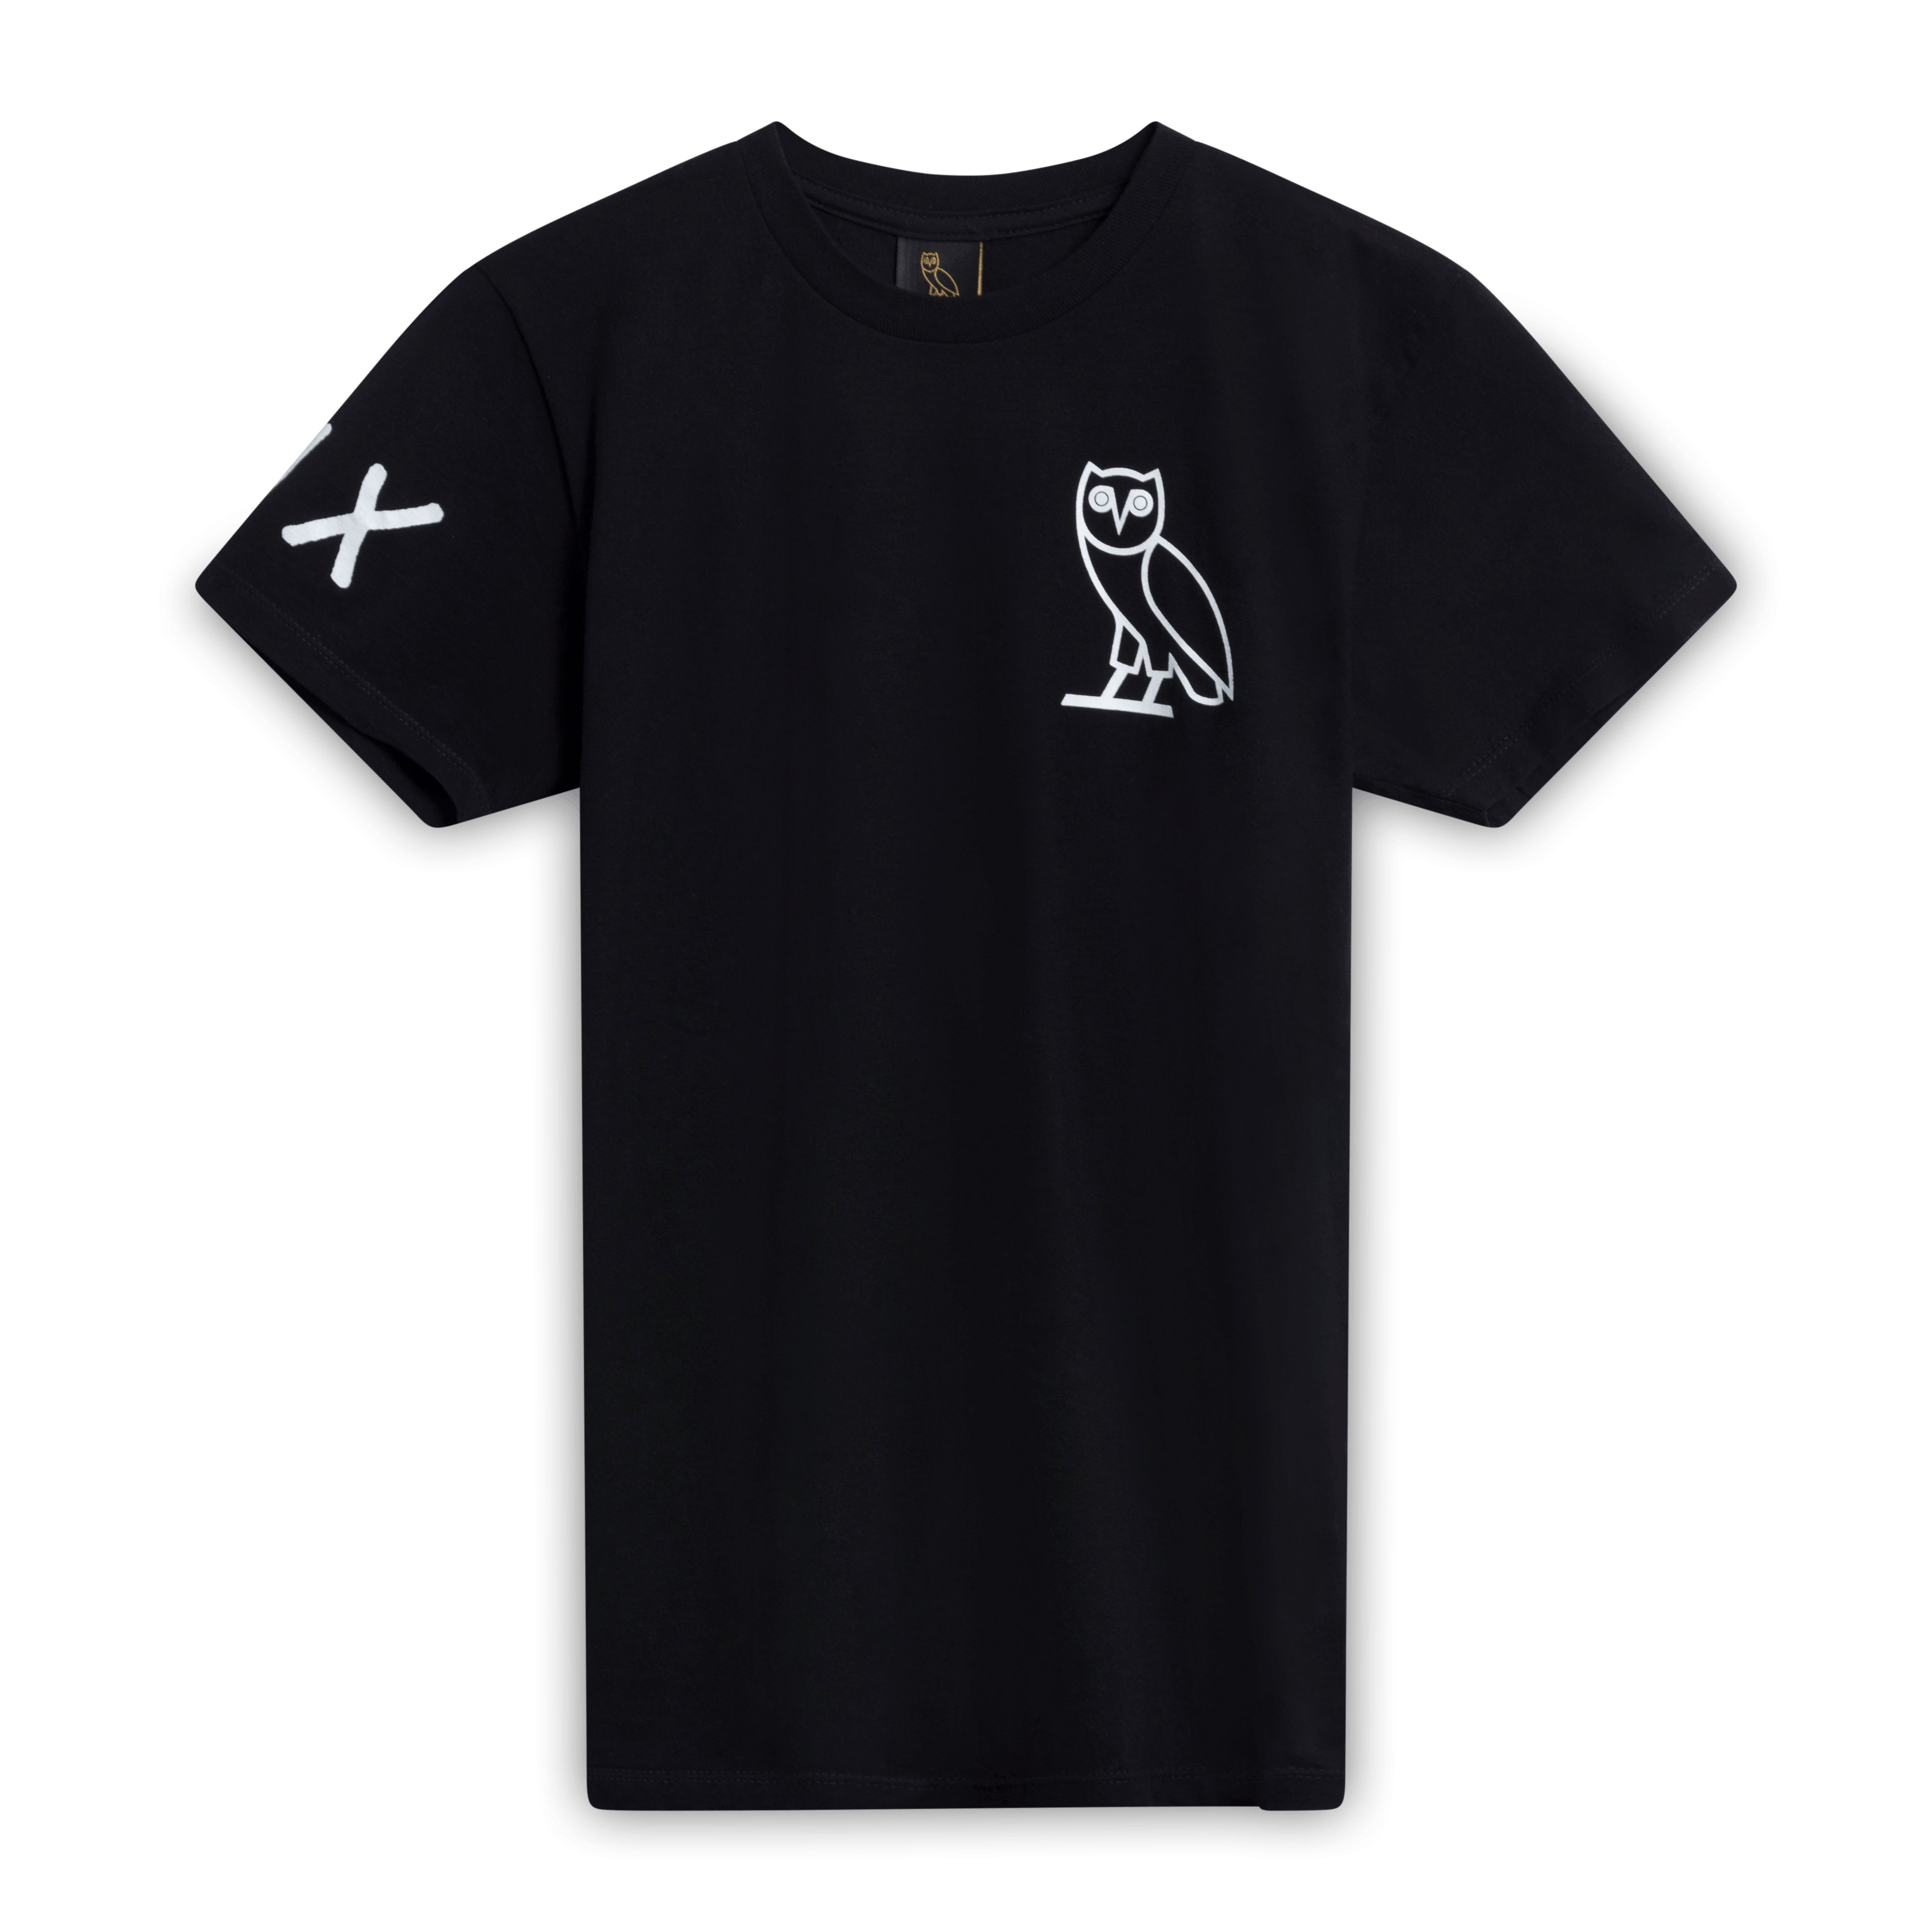 October's Very Own 6IX Owl T-Shirt - Black by Louise Chen | Basic